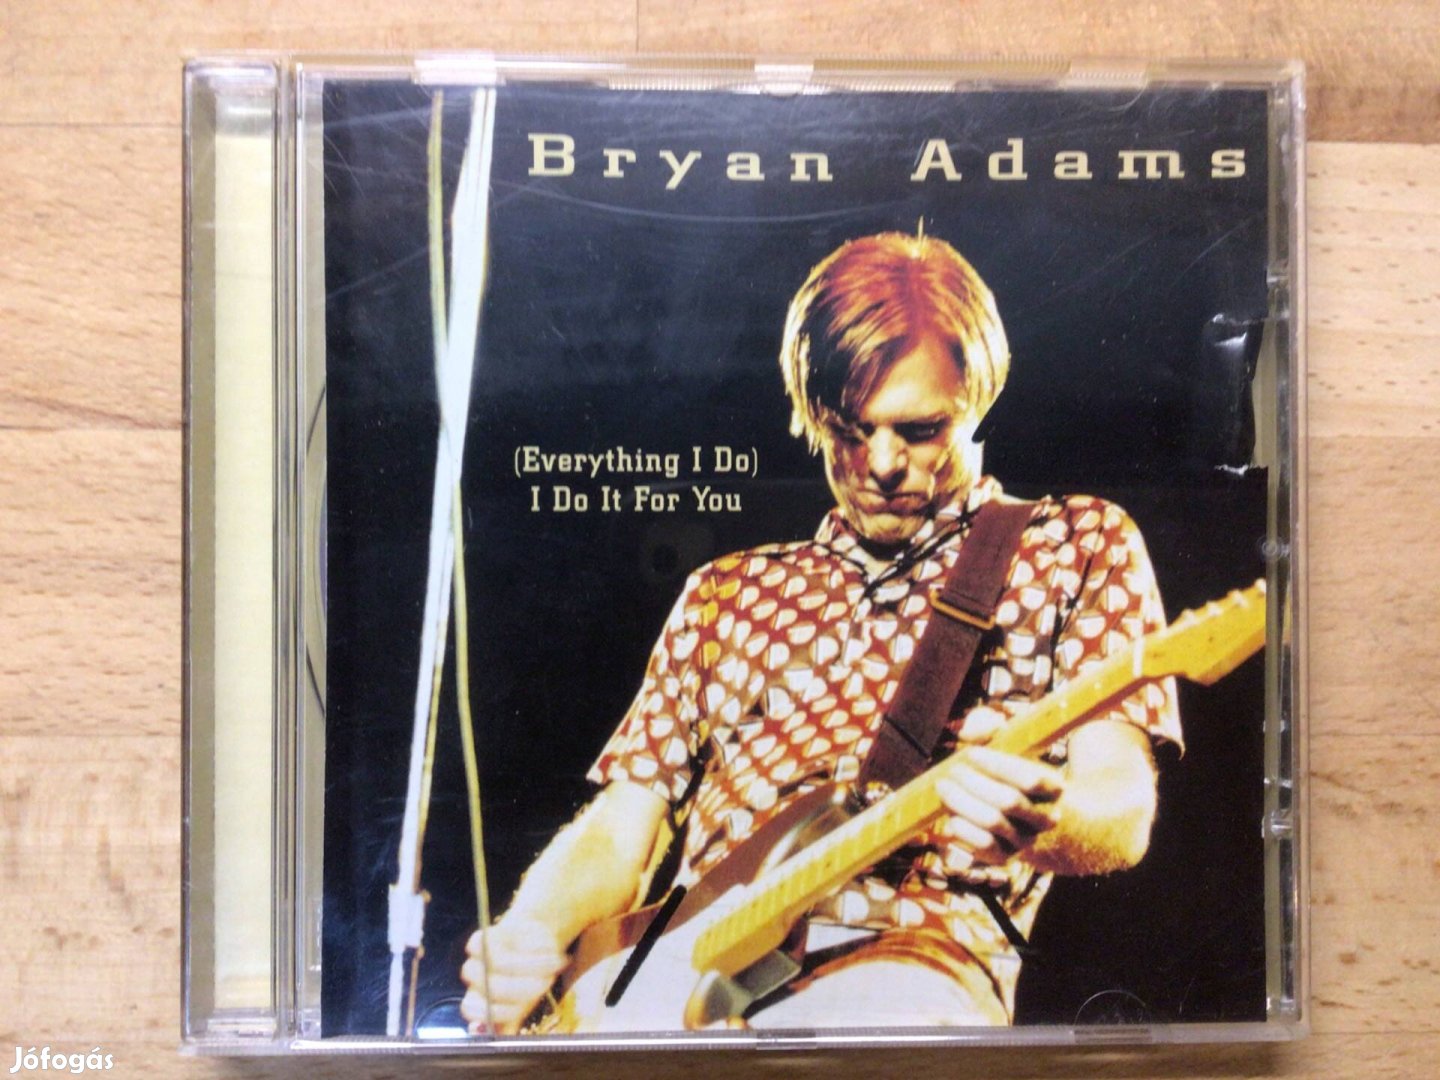 Bryan Adams- I Do It For You